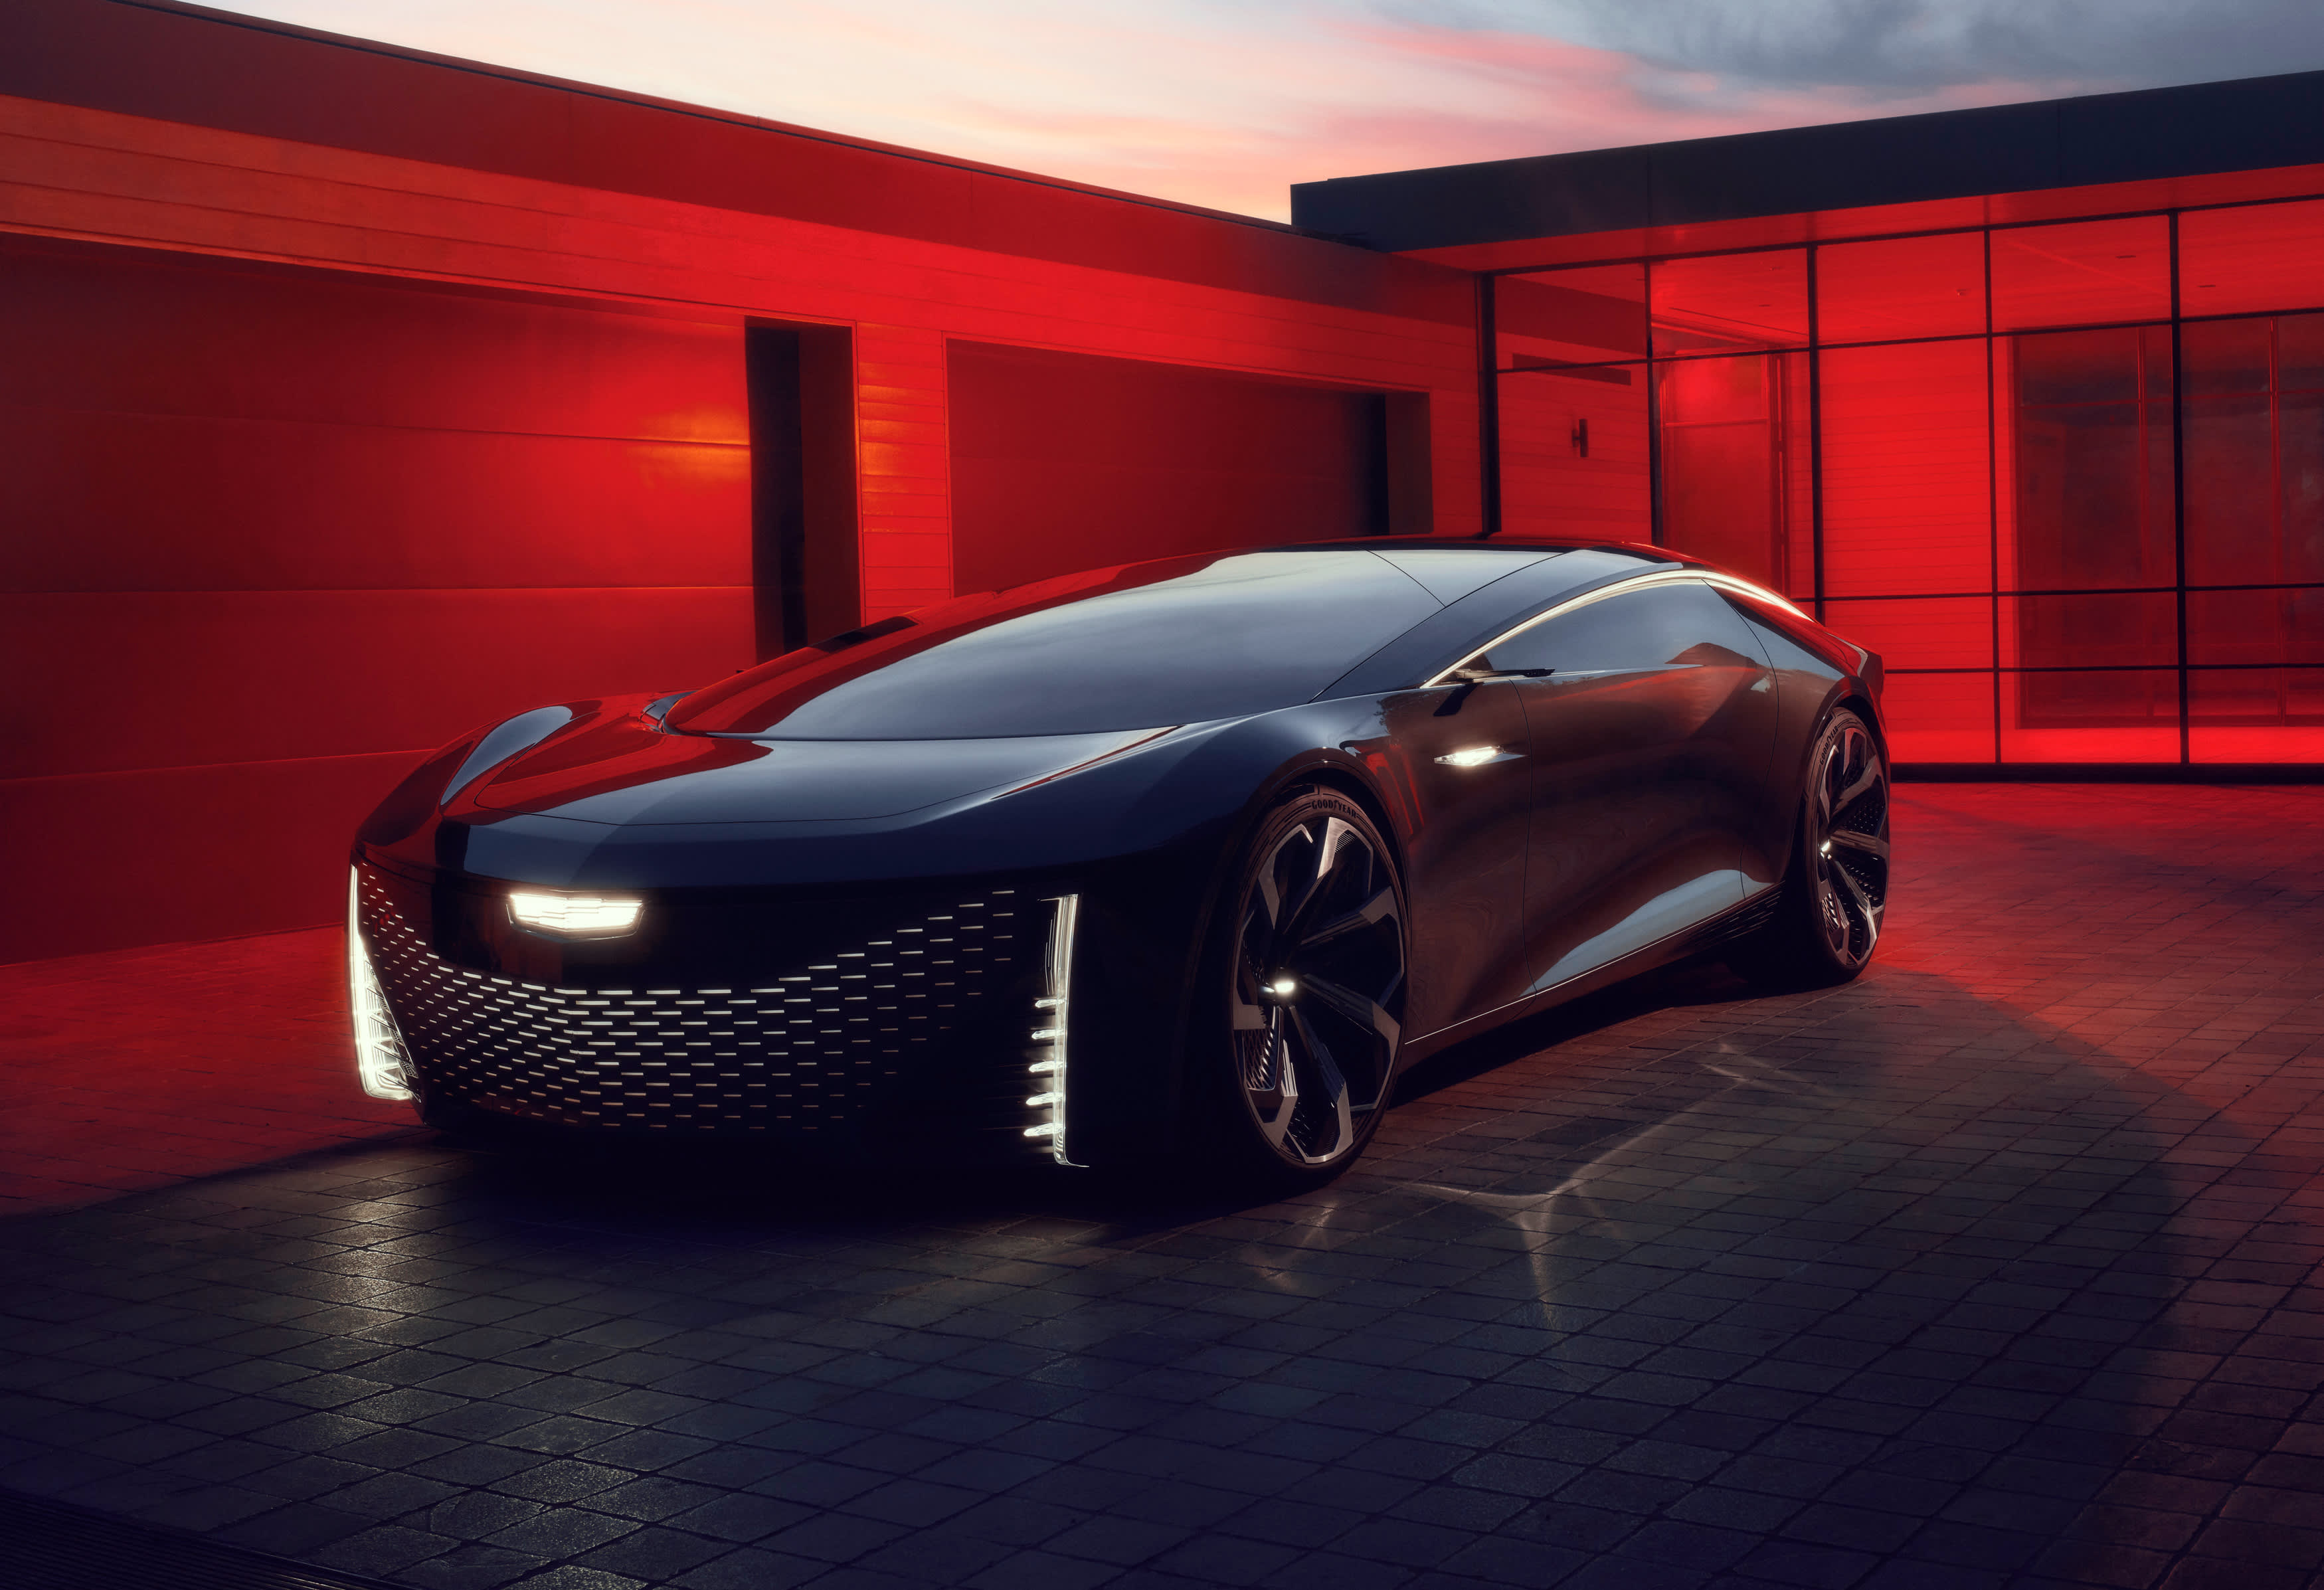 GM unveils new self-driving Cadillac concept vehicle